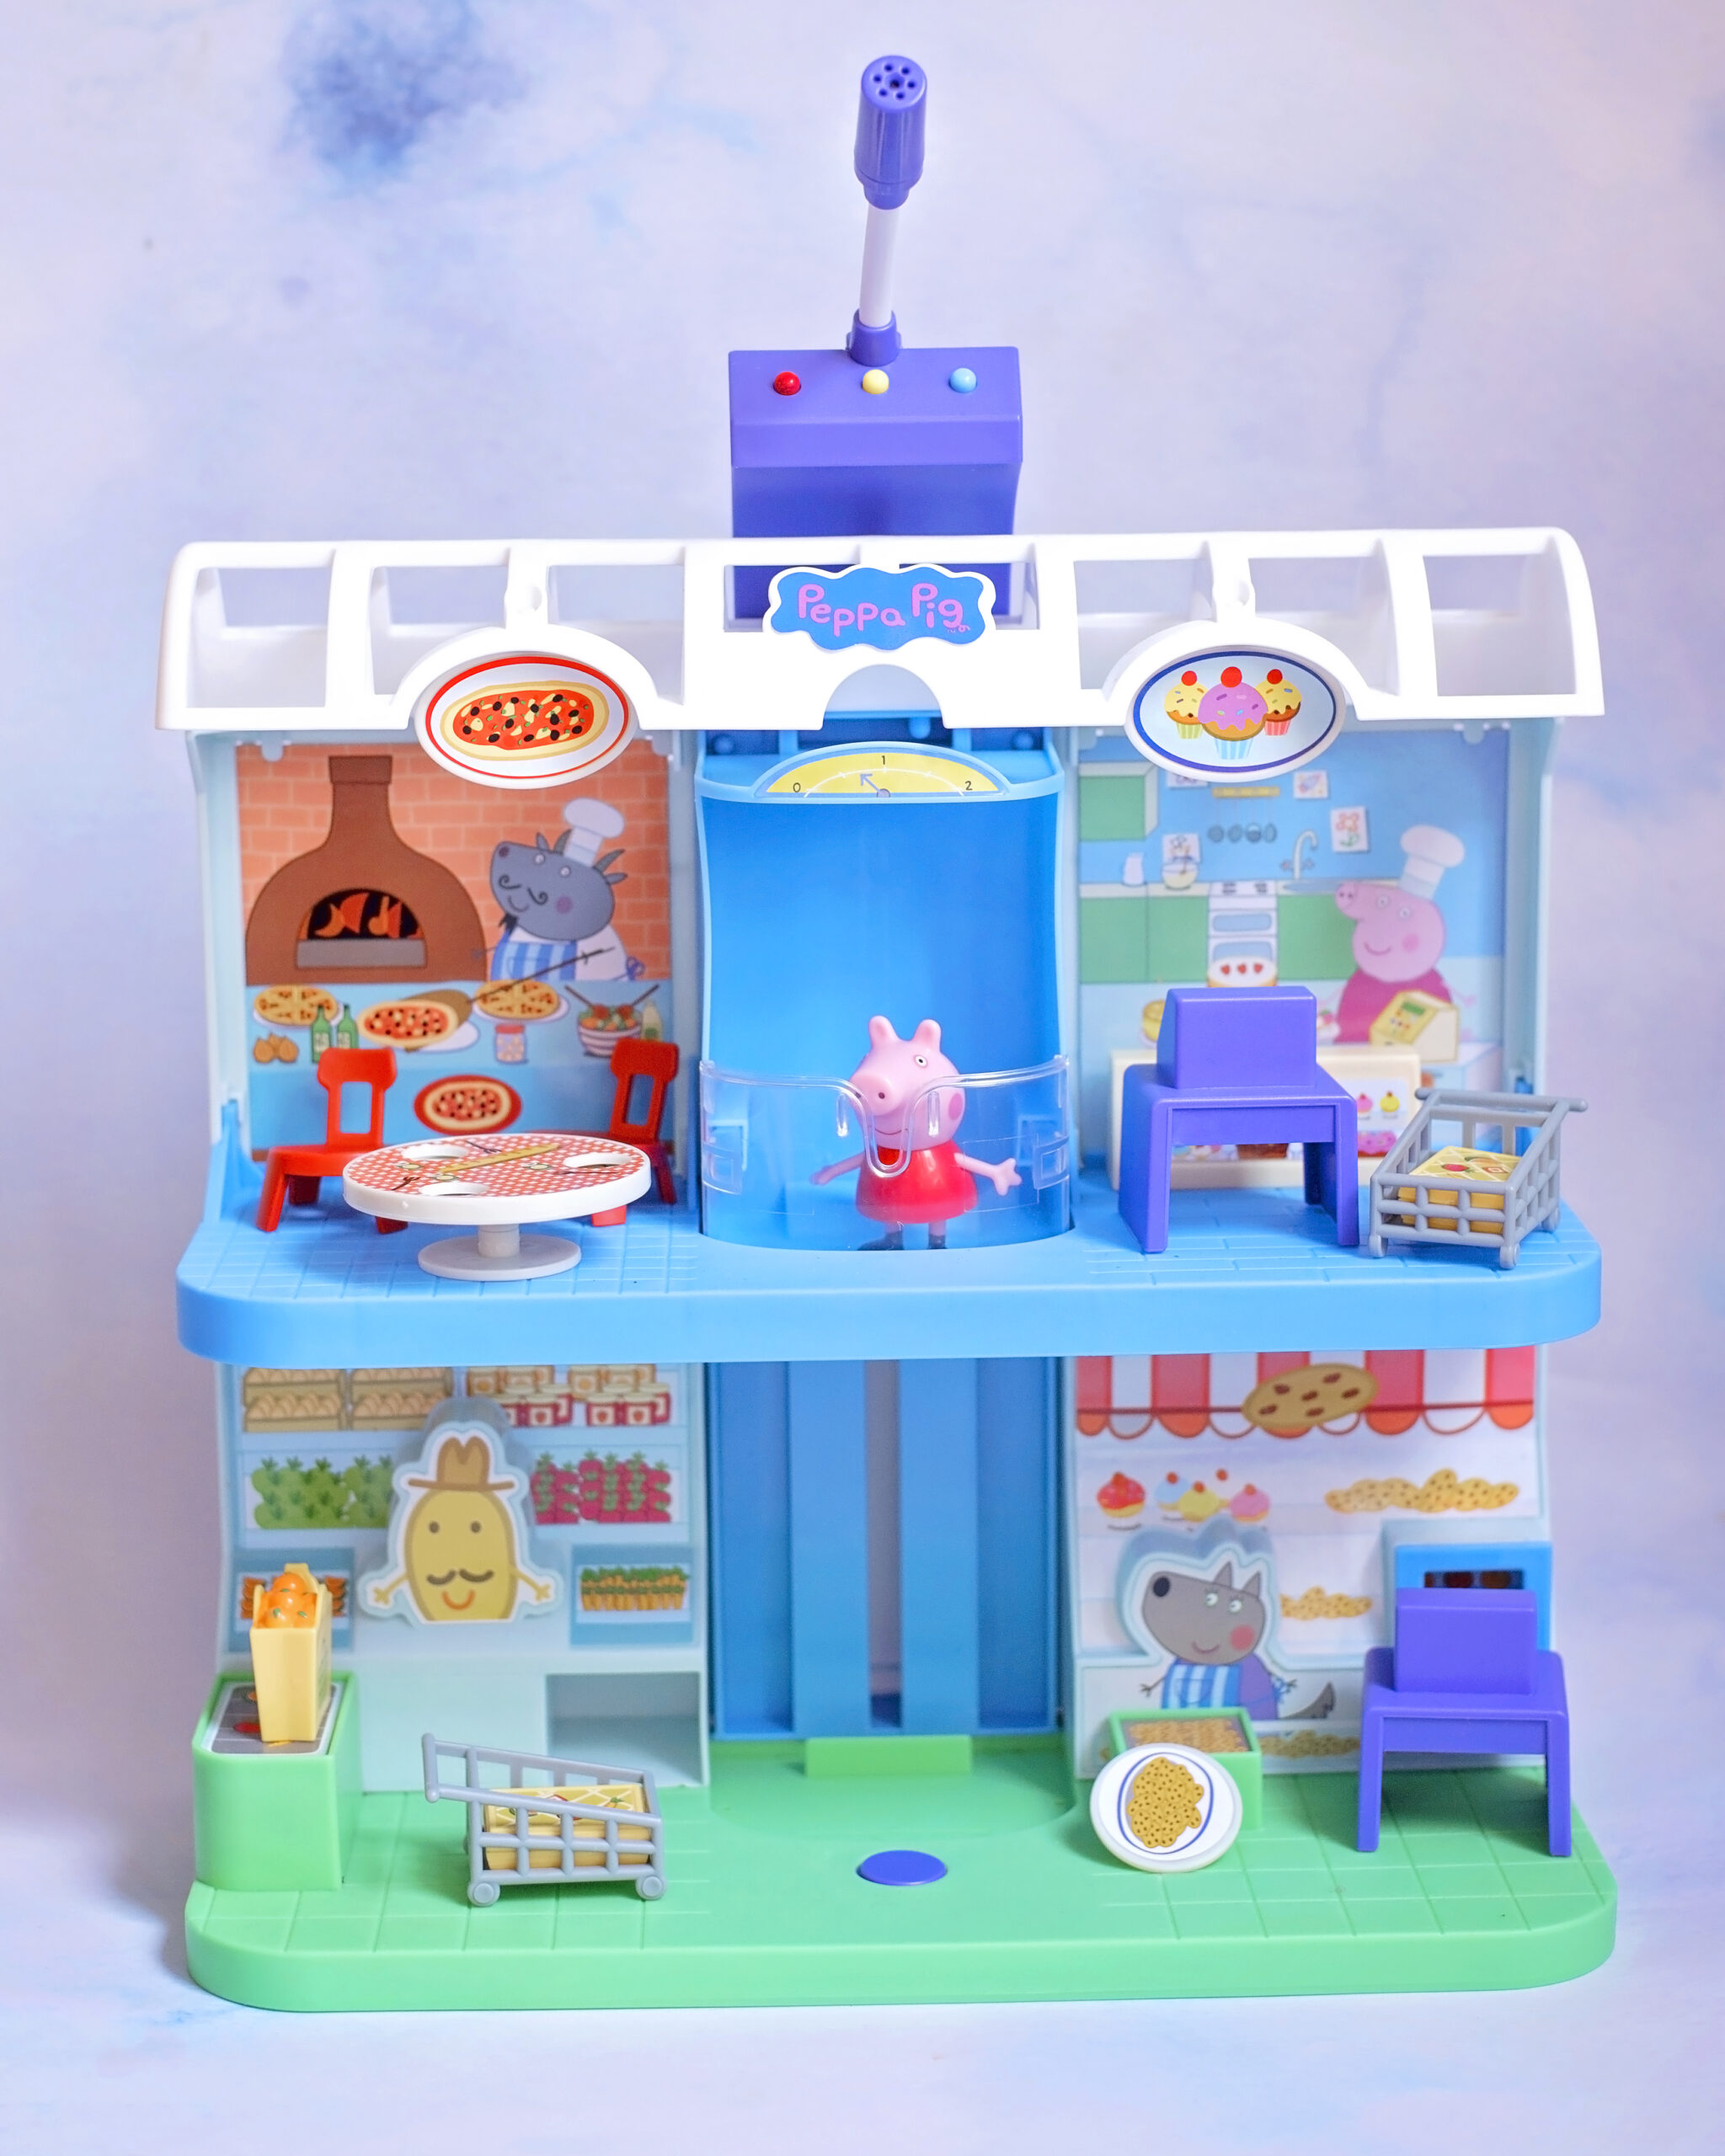 PEPPA’S SHOPPING CENTRE REVIEW